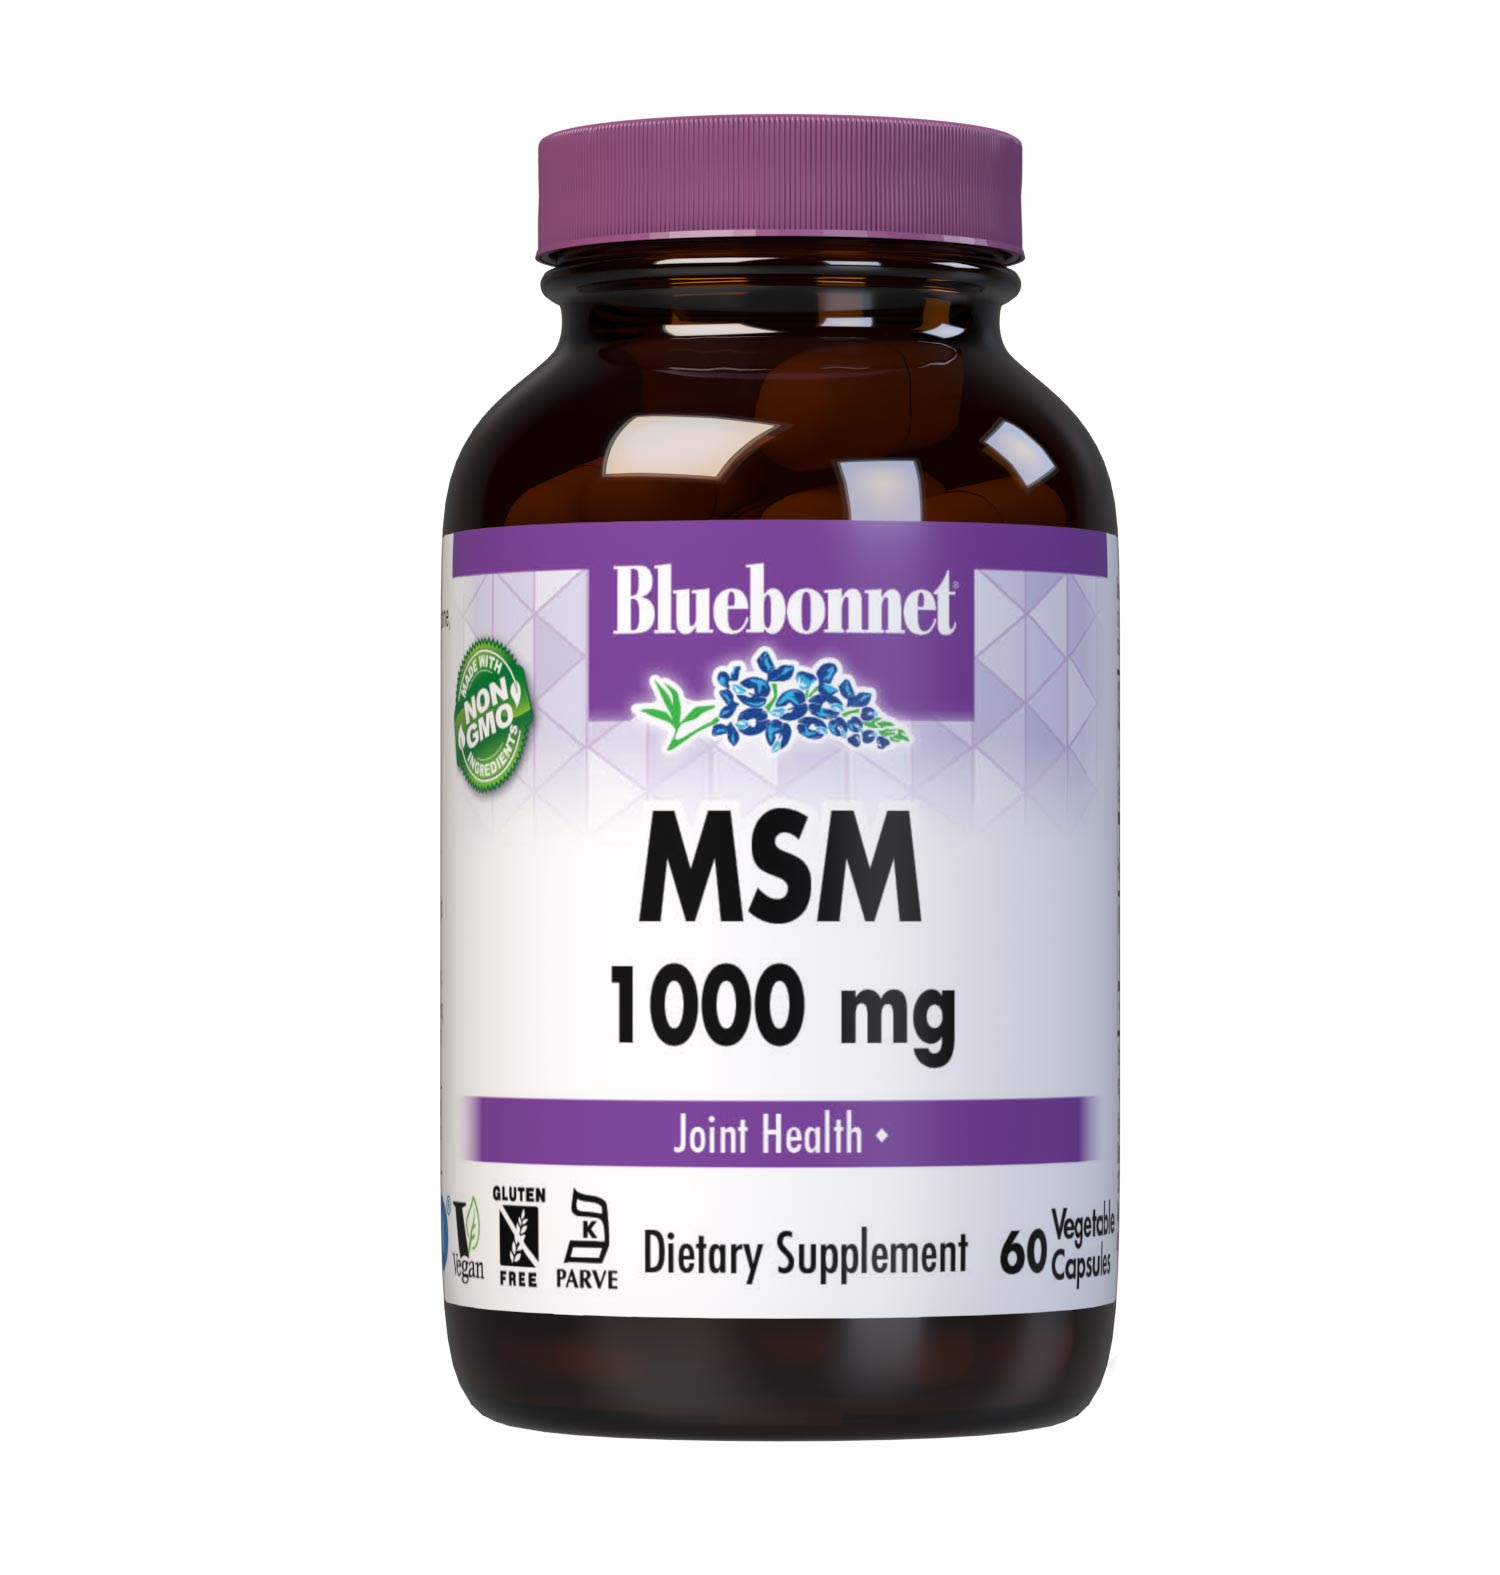 Bluebonnet’s MSM 1000 mg 60 Vegetable Capsules are formulated with patented OptiMSM methylsulfonylmethane, a non-toxic form of active sulfur that is tested in our own state-of-the-art laboratory for purity and potency. MSM helps support healthy joint cartilage and connective tissue. #size_60 count